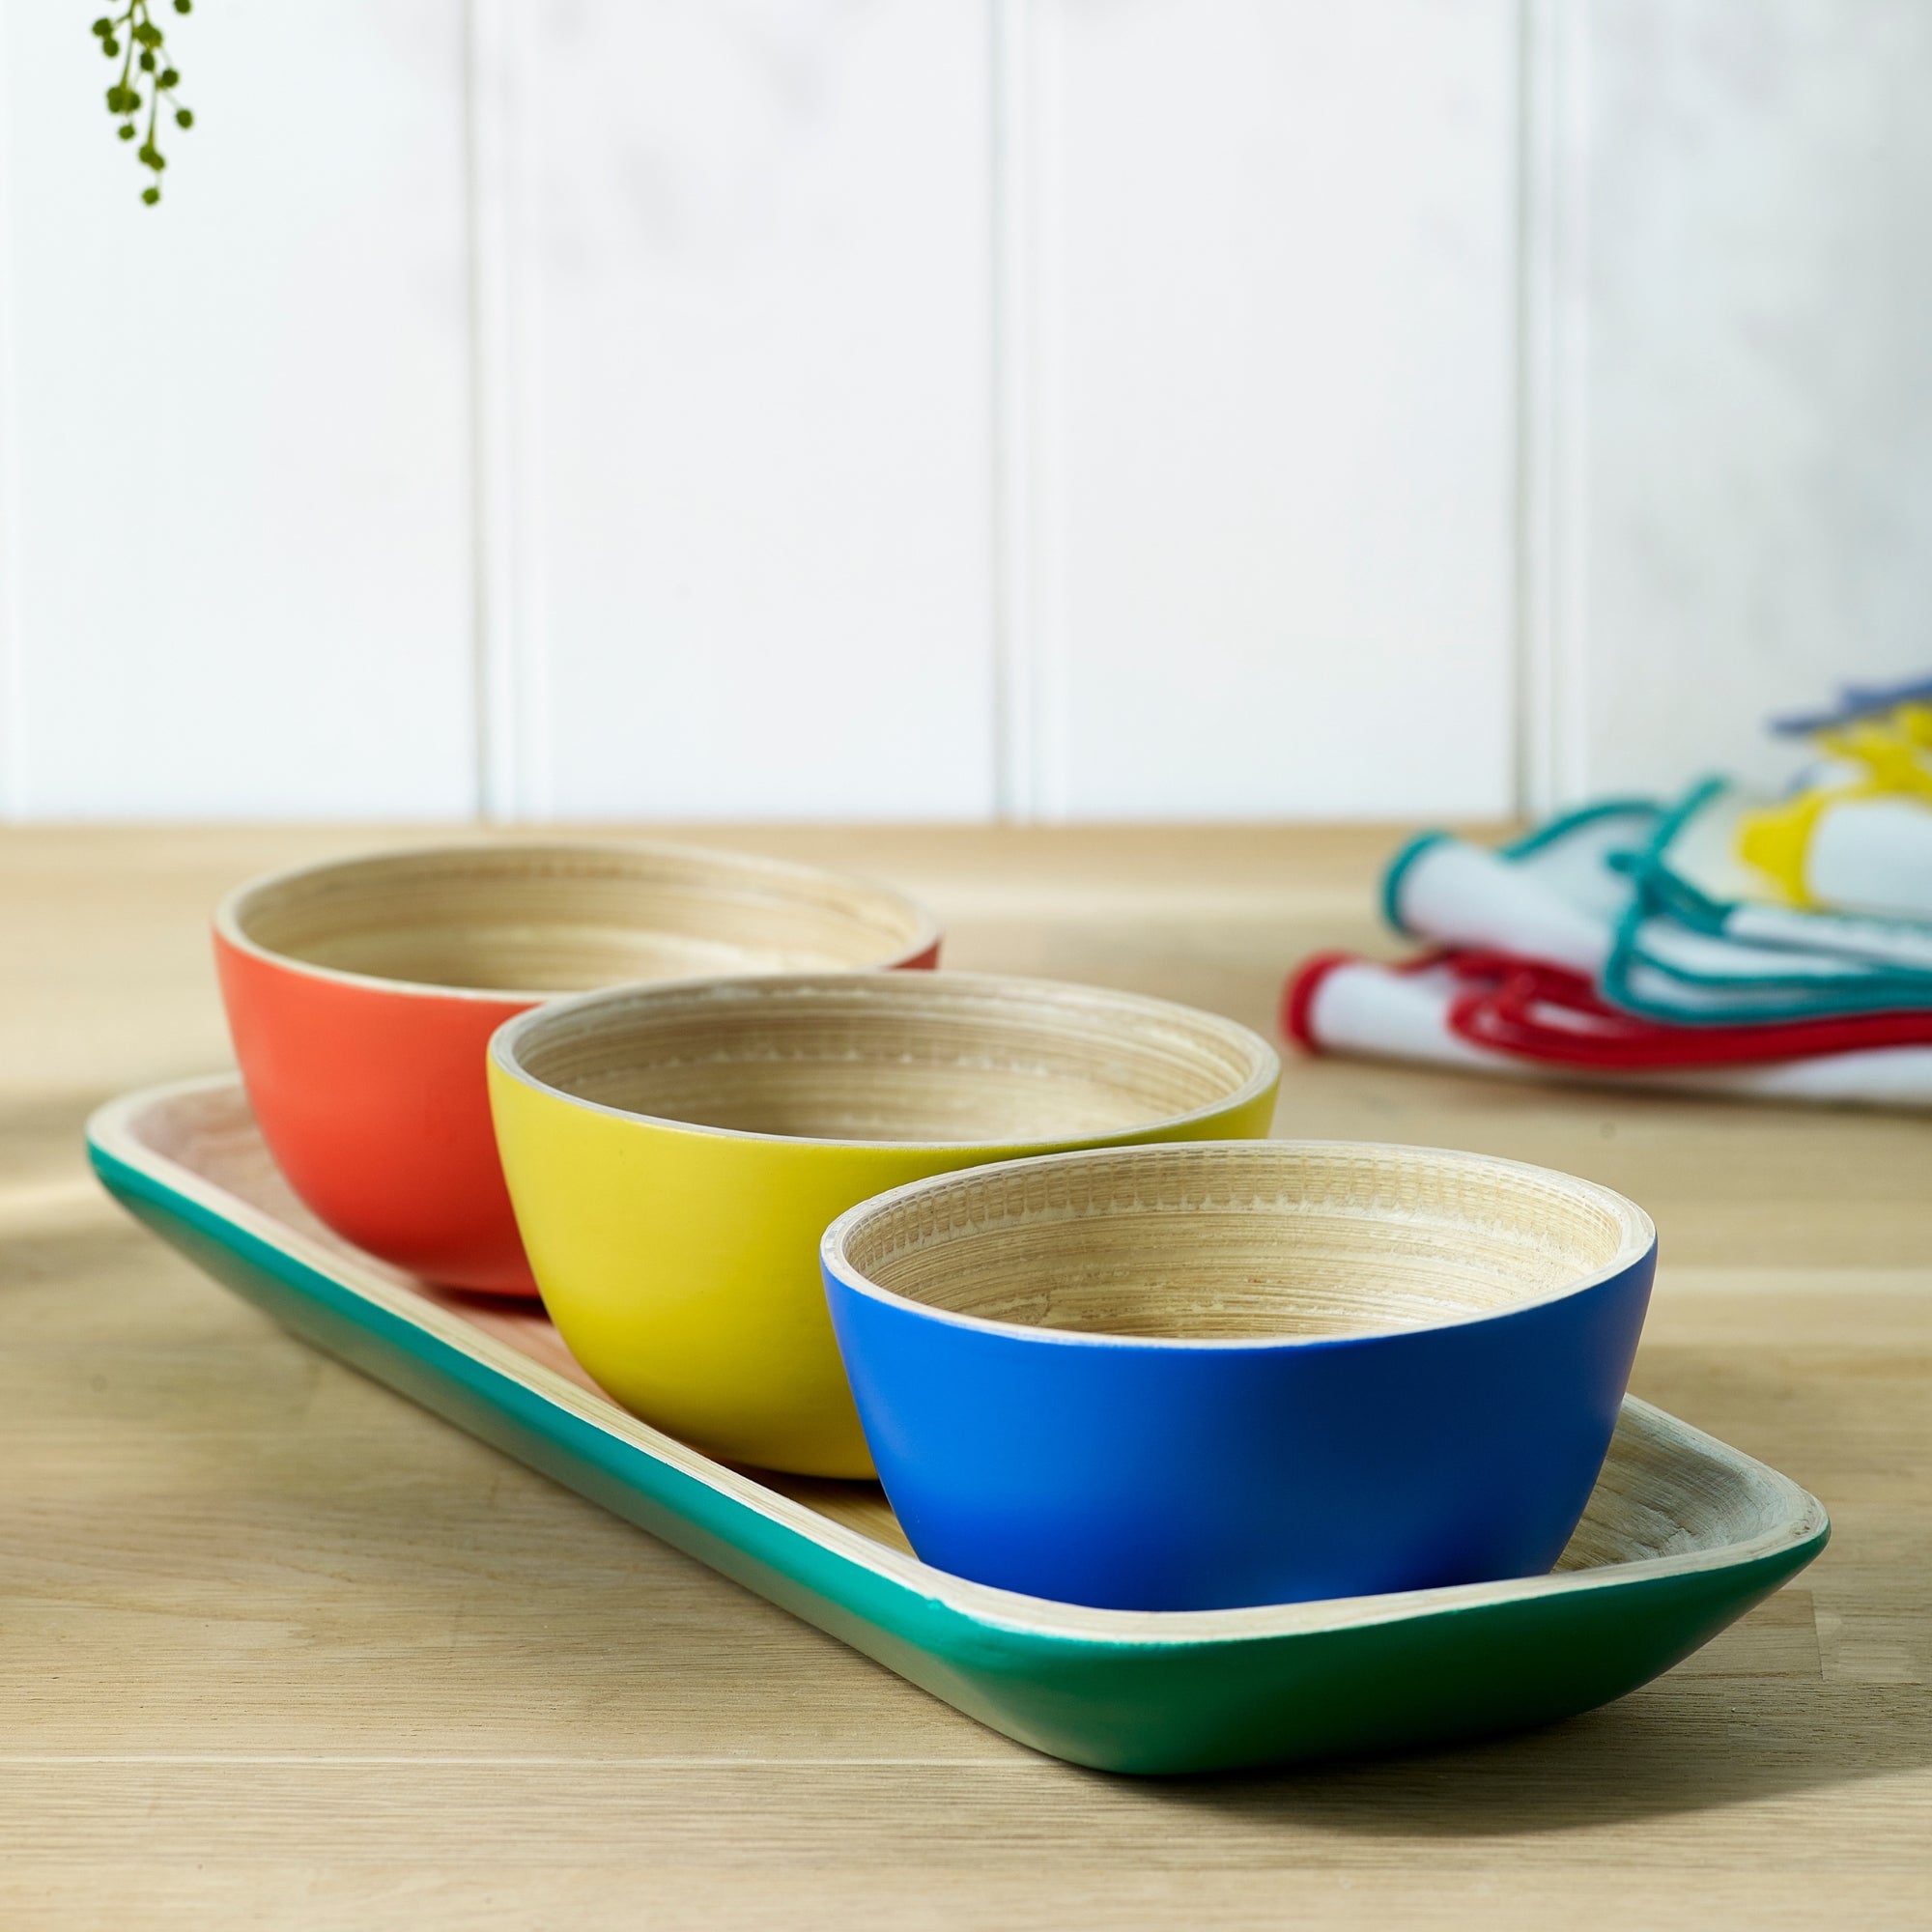 Sur La Table Colour Me Happy Bamboo Tray and Set of 4 Dipping Bowls